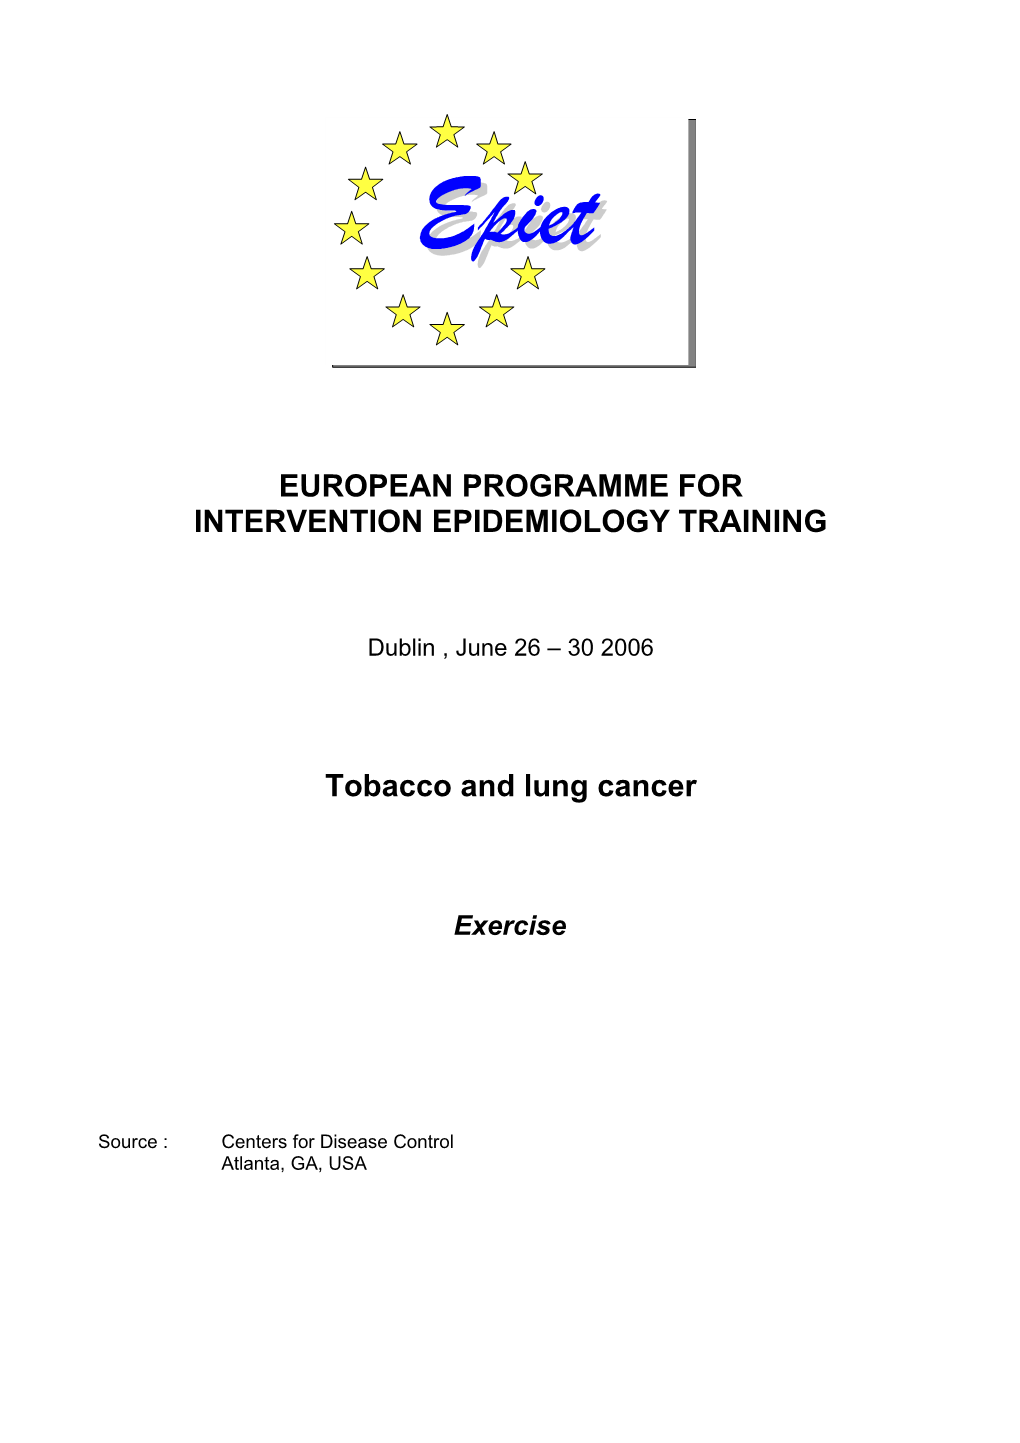 EPIET - 1995 Introductory Course - Cigarette Smoking and Lung Cancer